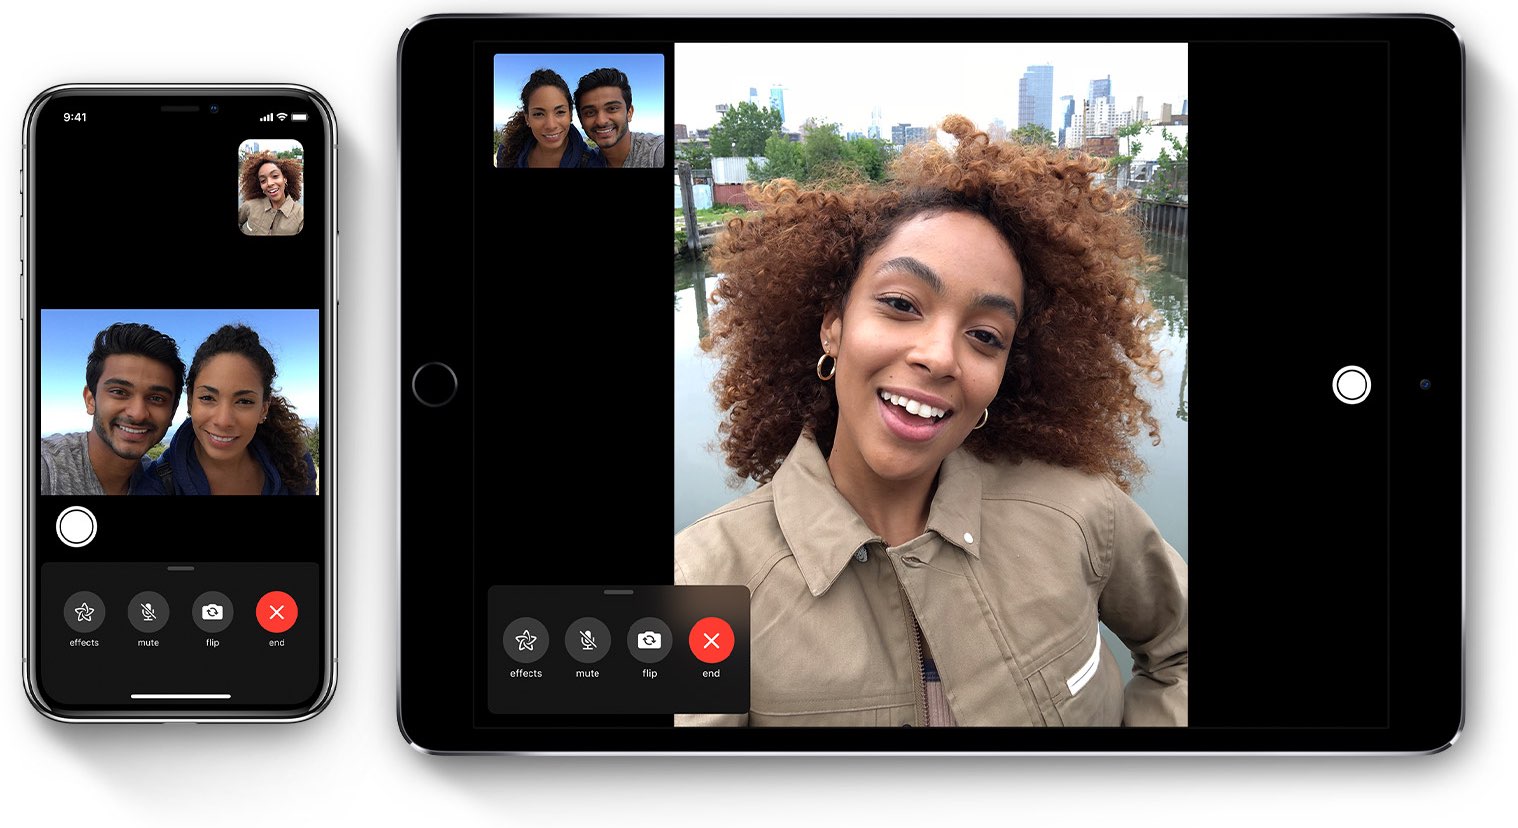 Apple's marketing image showcasing a FaceTime video call running on iPhone and iPad